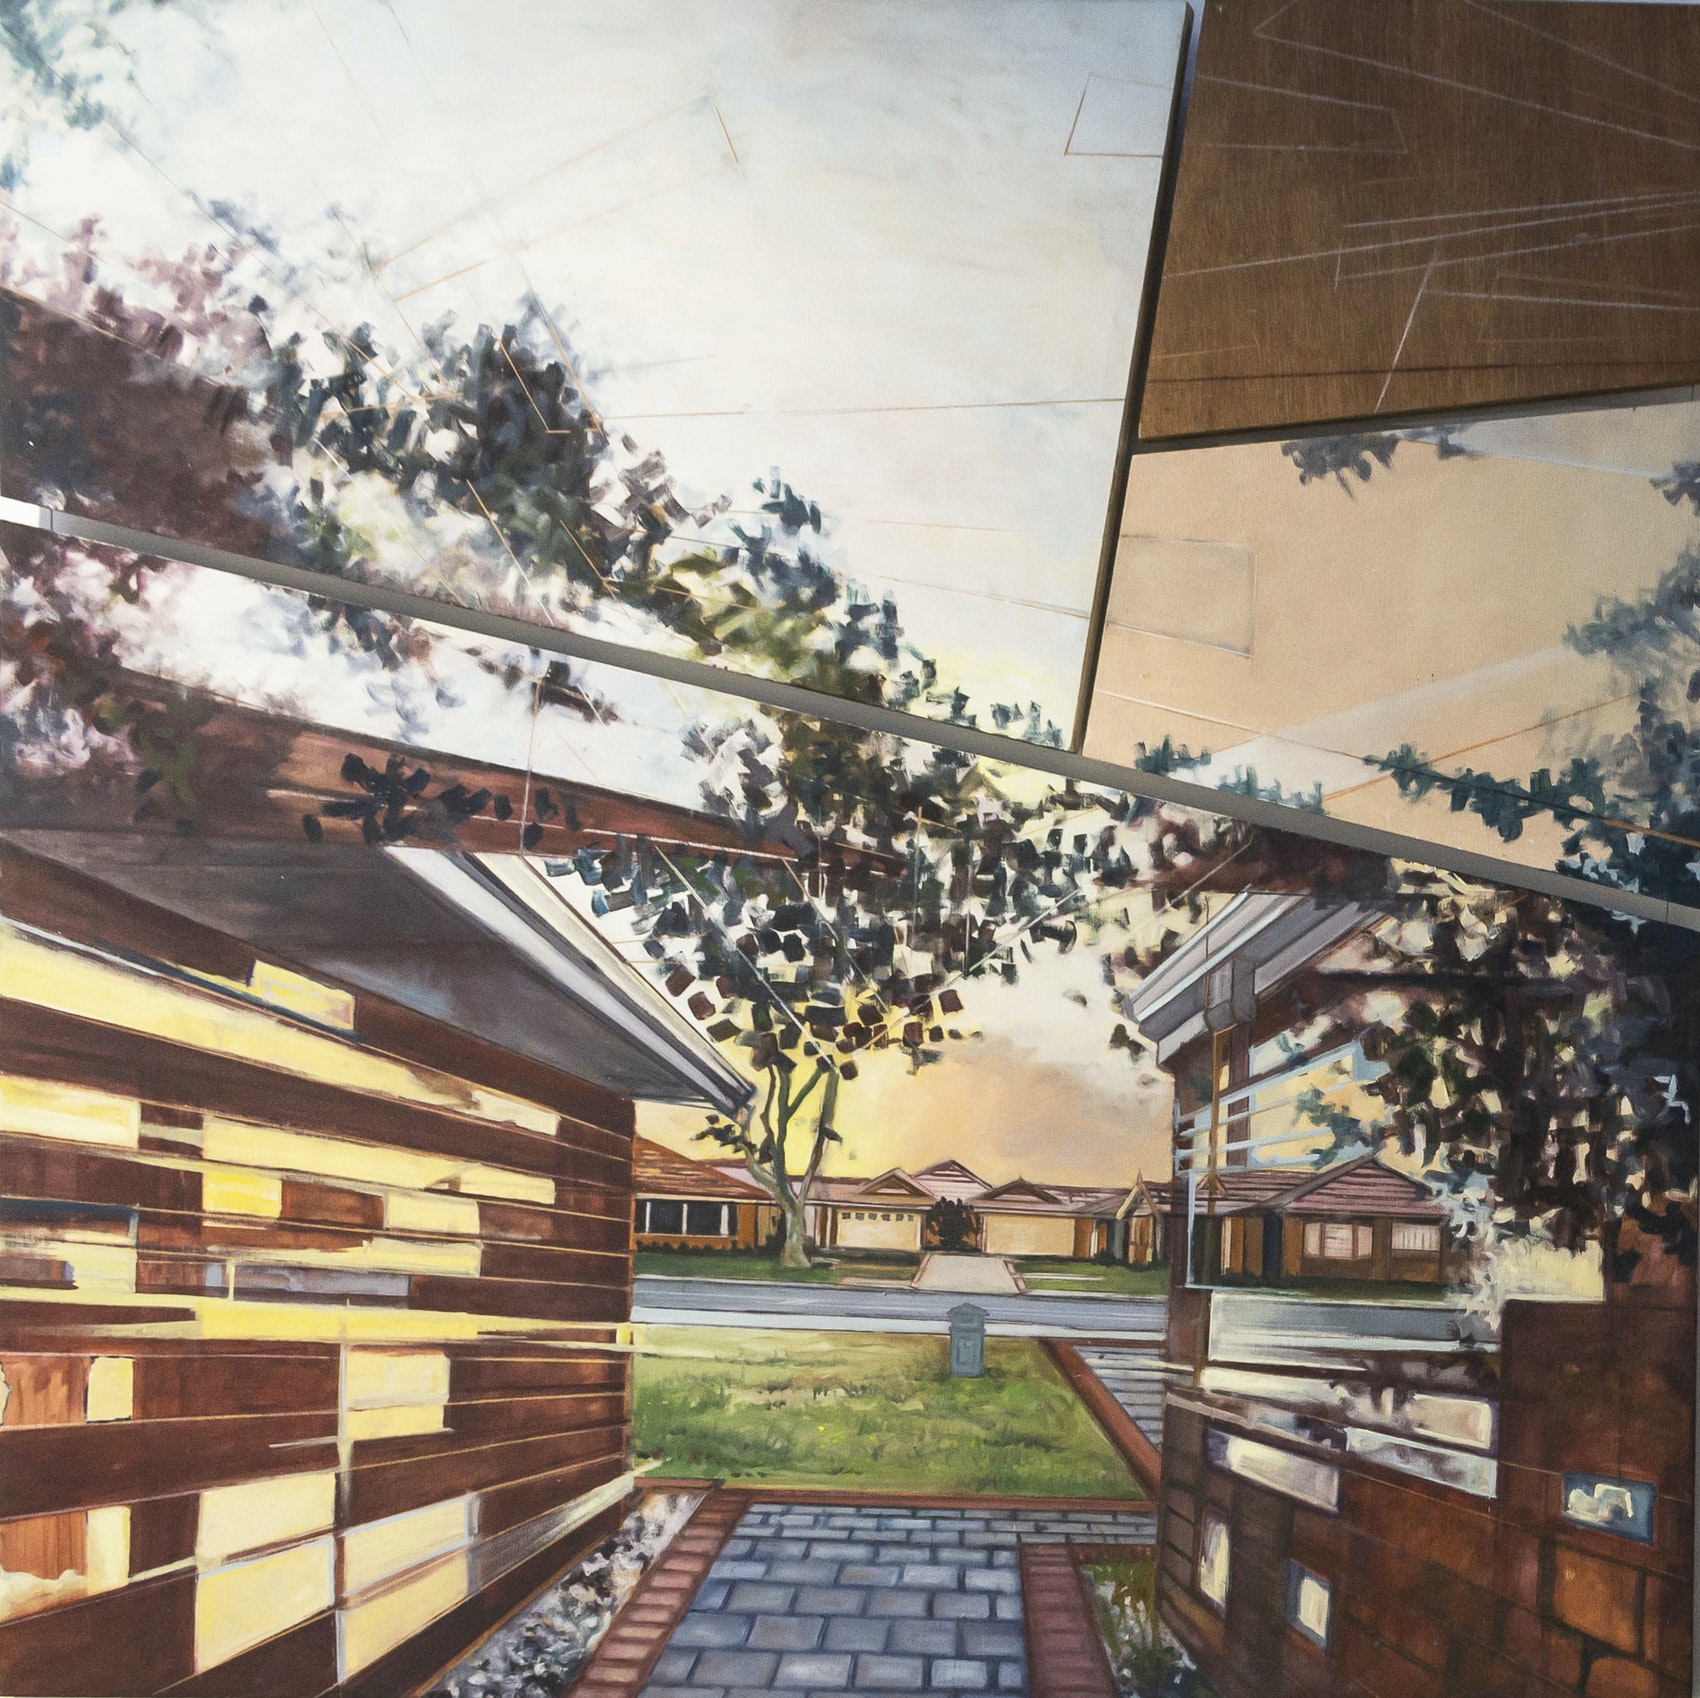 Parallel Perspective by Zainub Khan. A painting using linear perspective linework of a suburban house and street. Art. 